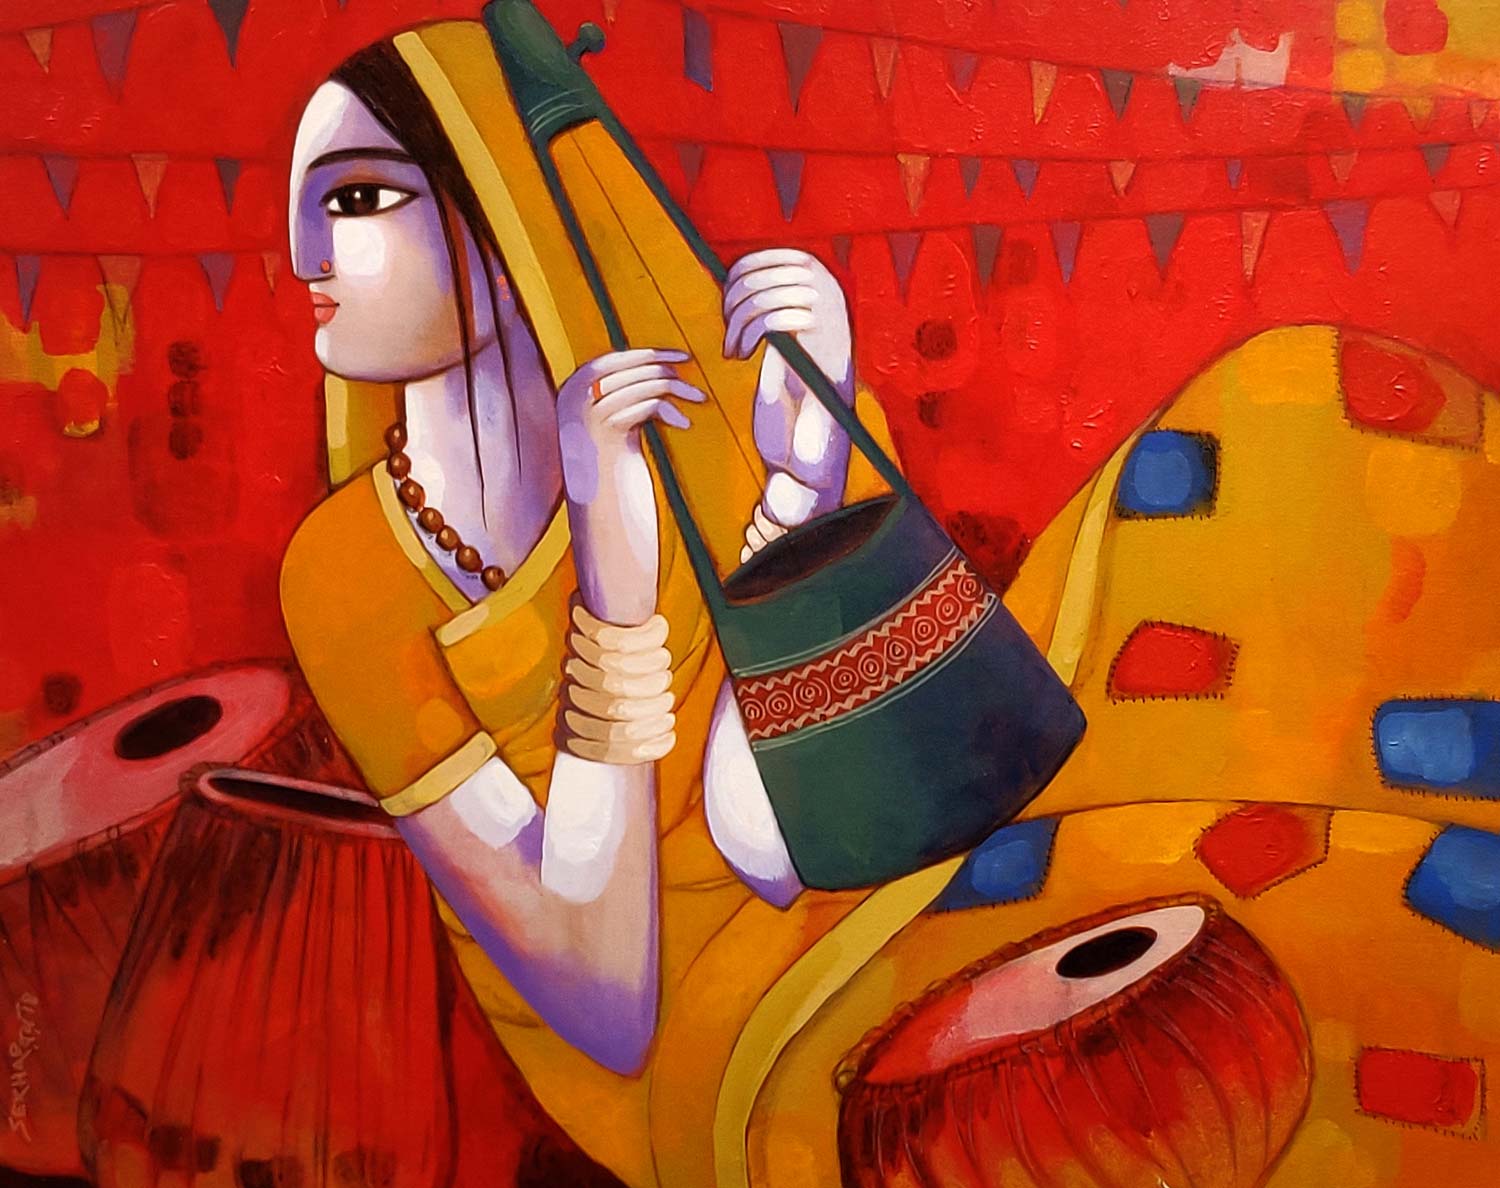 Buy Baul-2 Painting with Acrylic on Canvas by Sekhar Roy | IndiGalleria